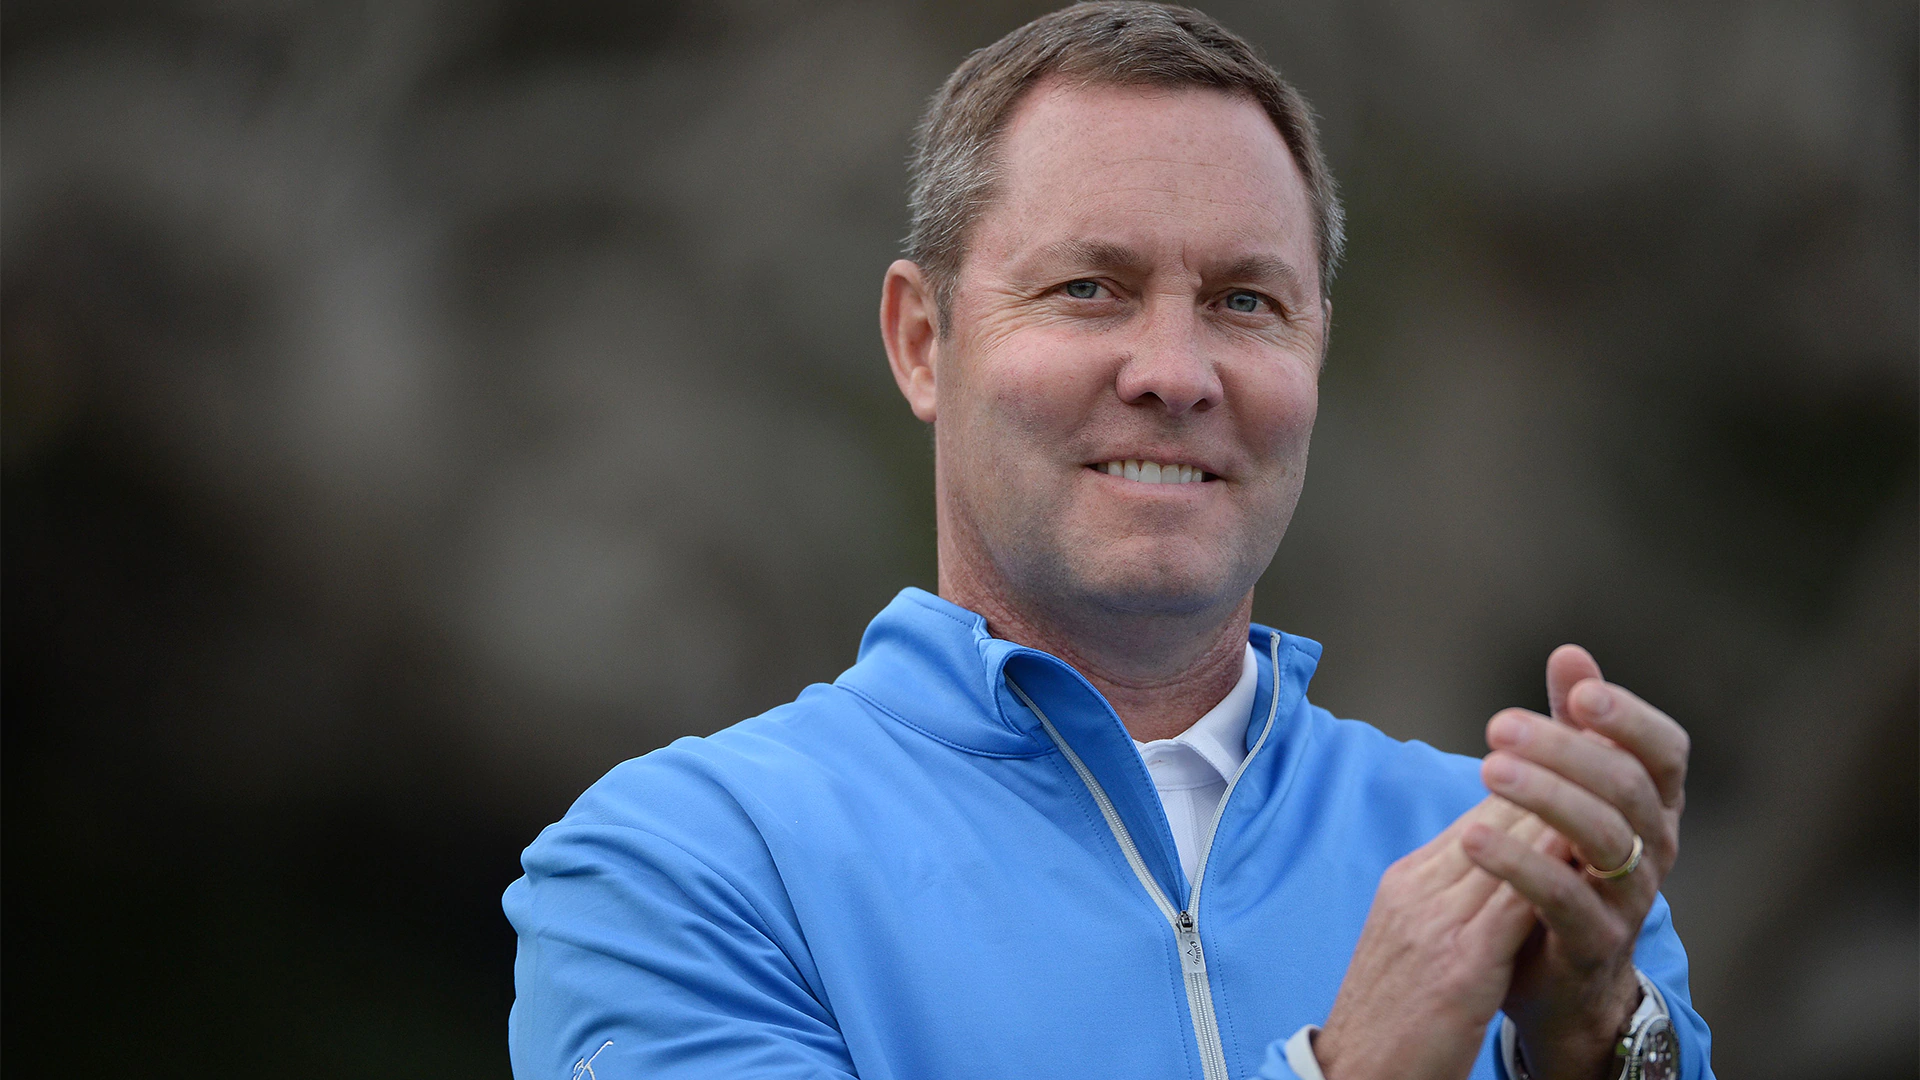 Mike Whan: LPGA hopes to return to normal at events by ‘late Q1’ of 2021